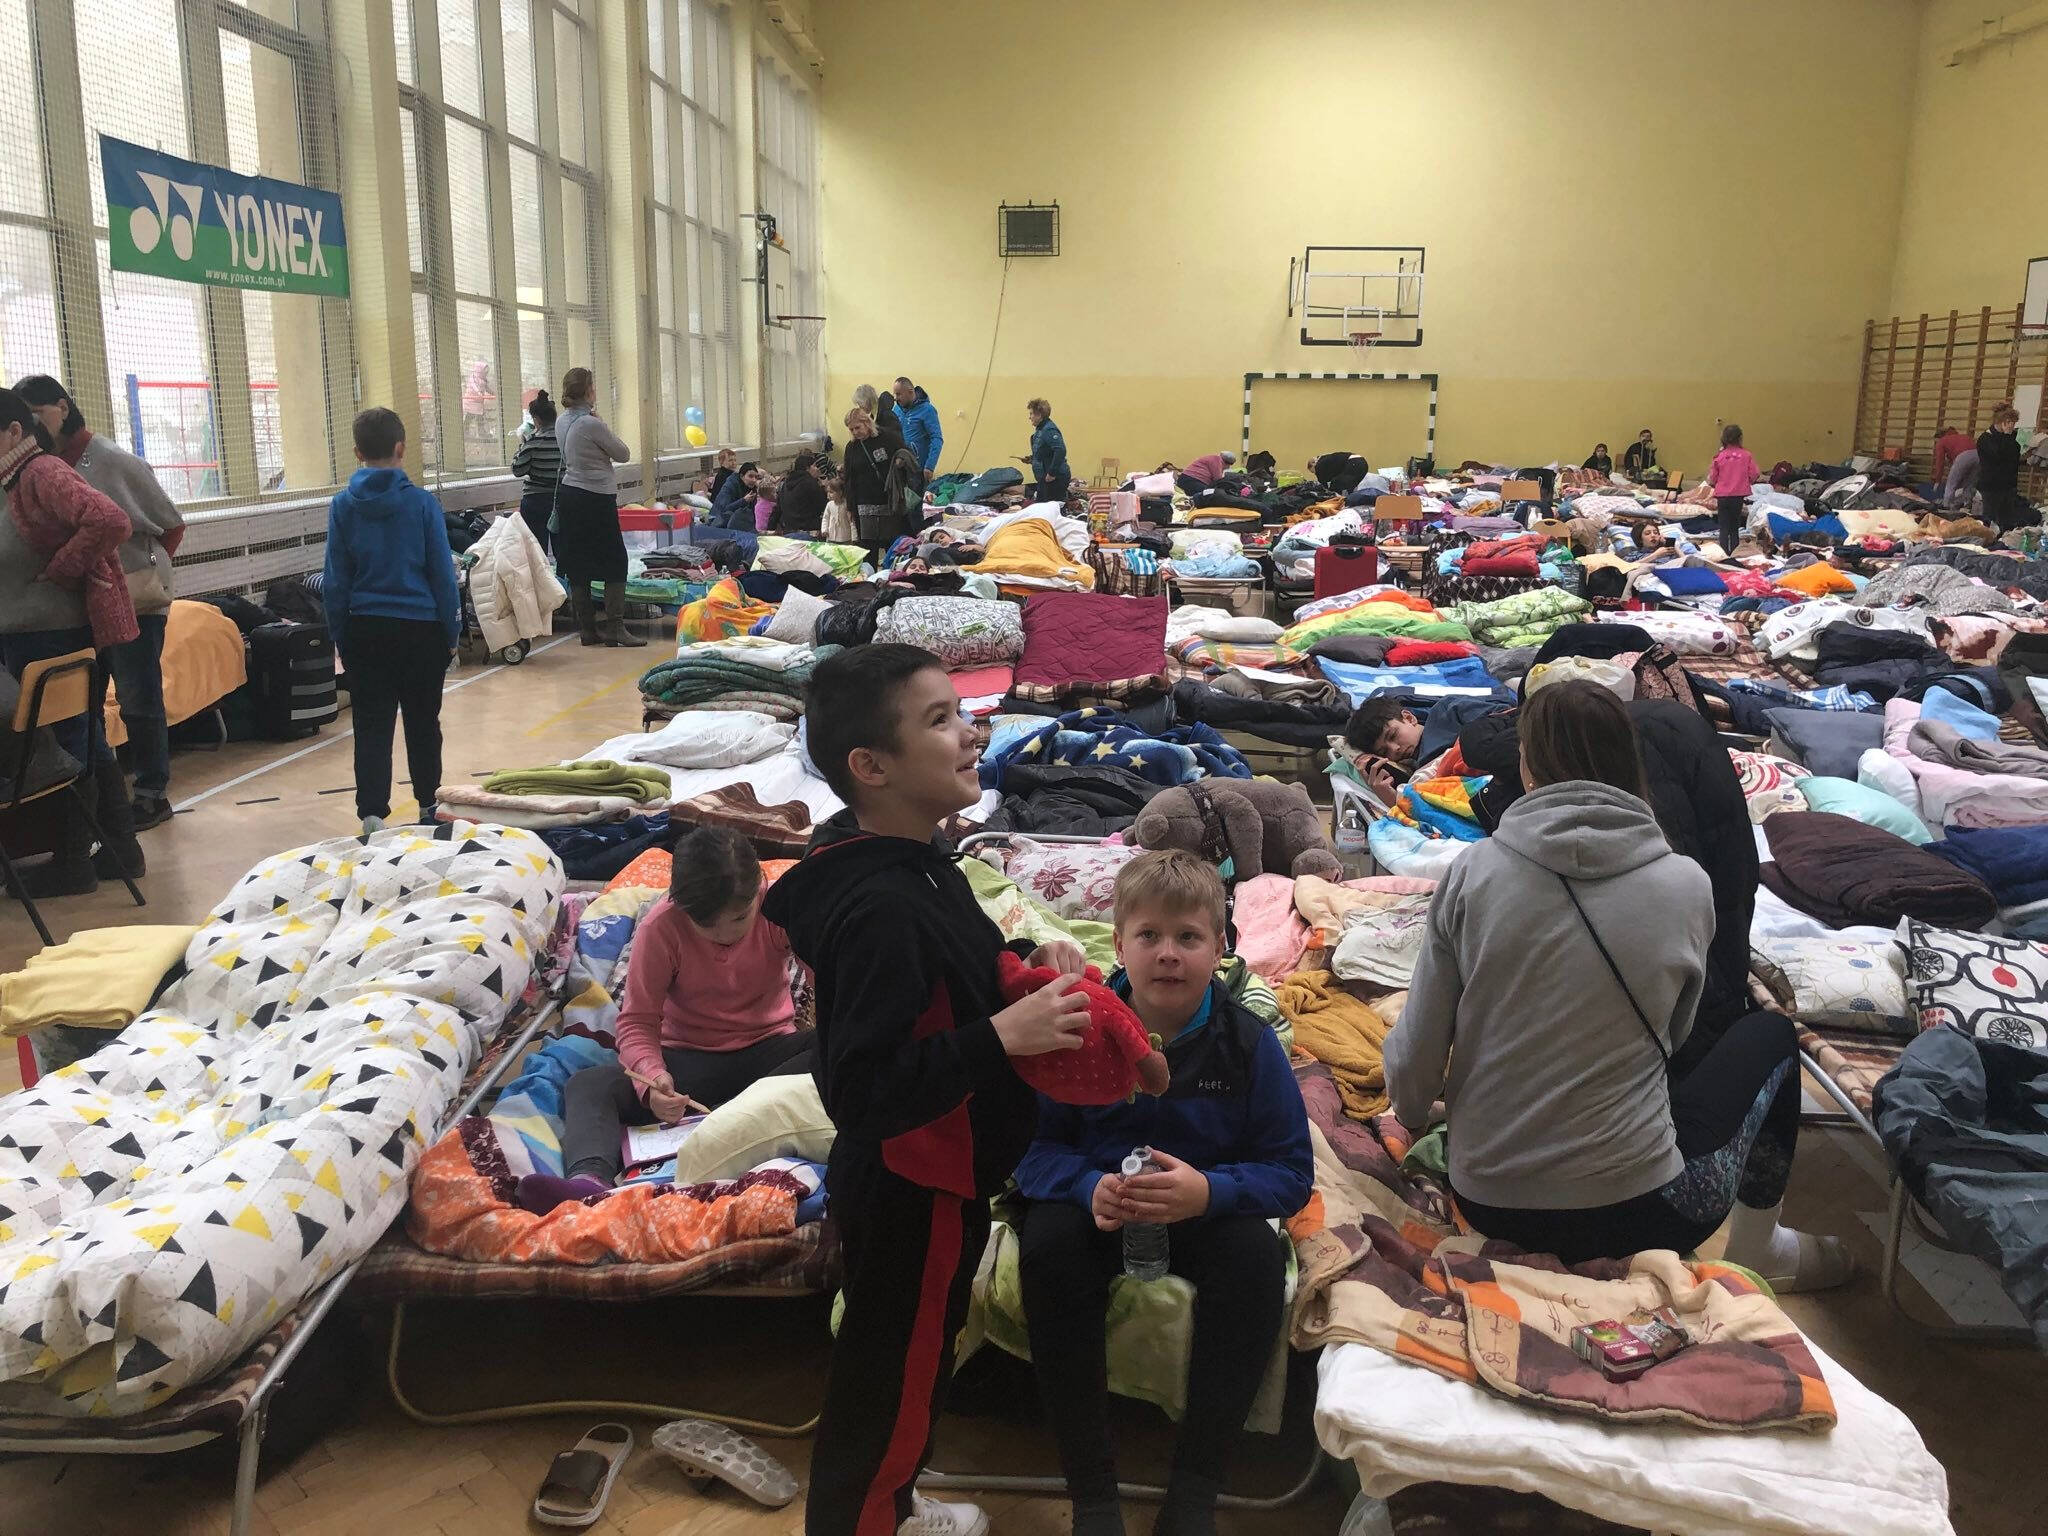 Courtesy Photo
Children are seen in a refugee center in Poland.